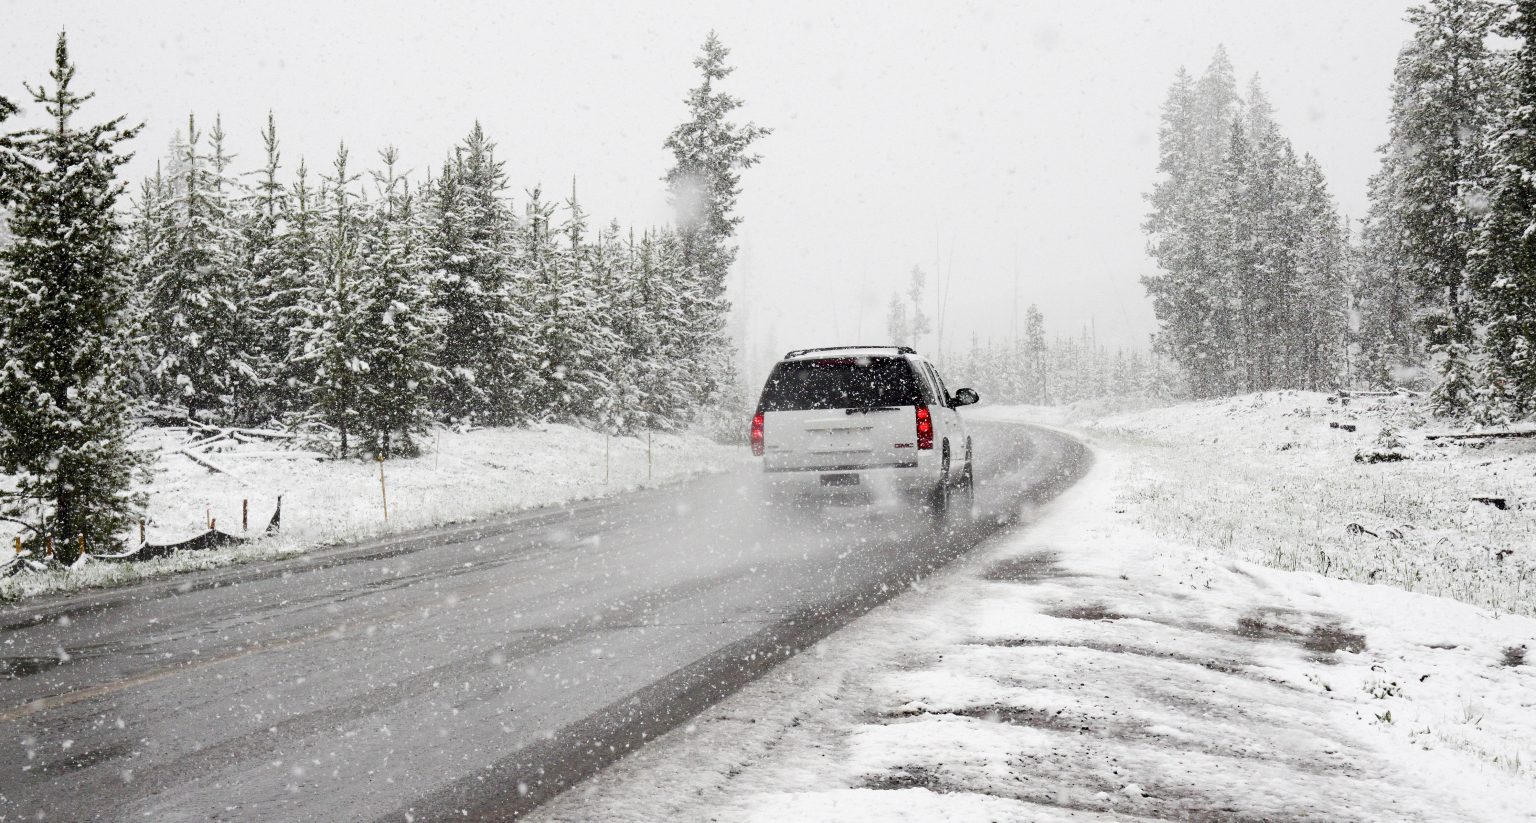 Take Safety Home: Winter Driving Safety